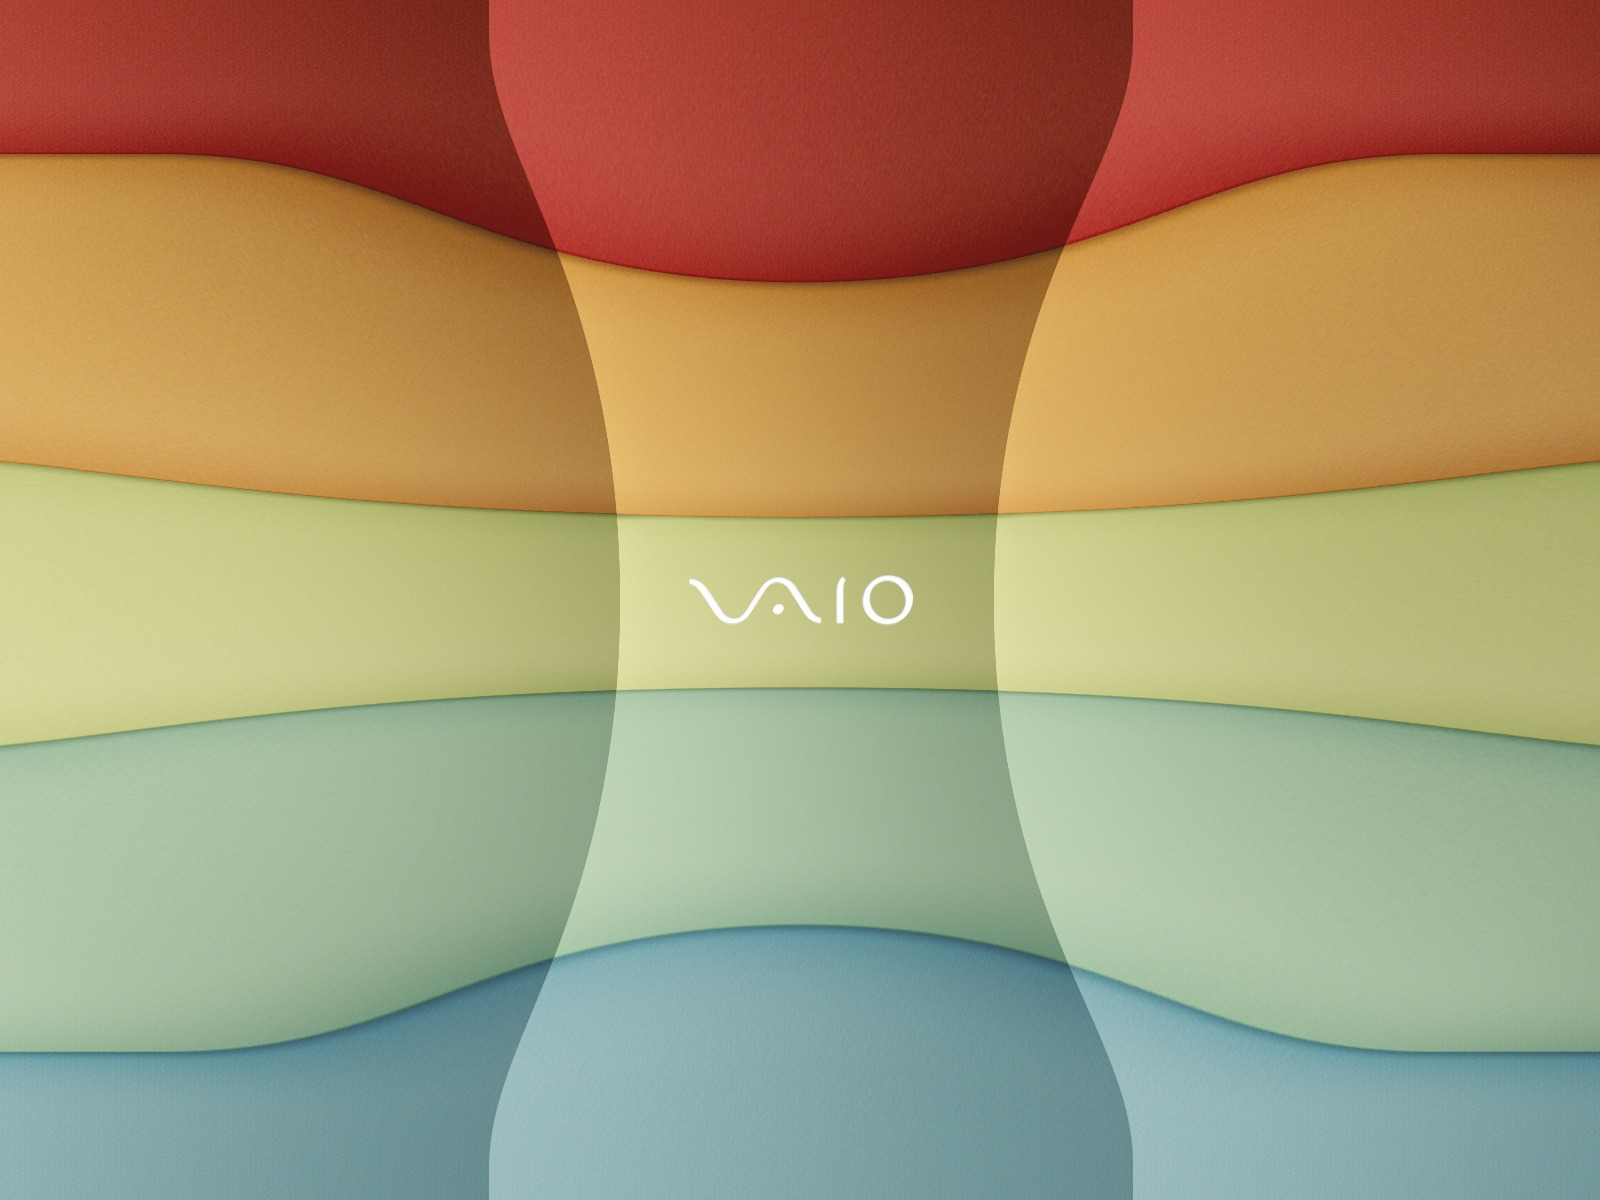 Vaio Smooth for 1600 x 1200 resolution